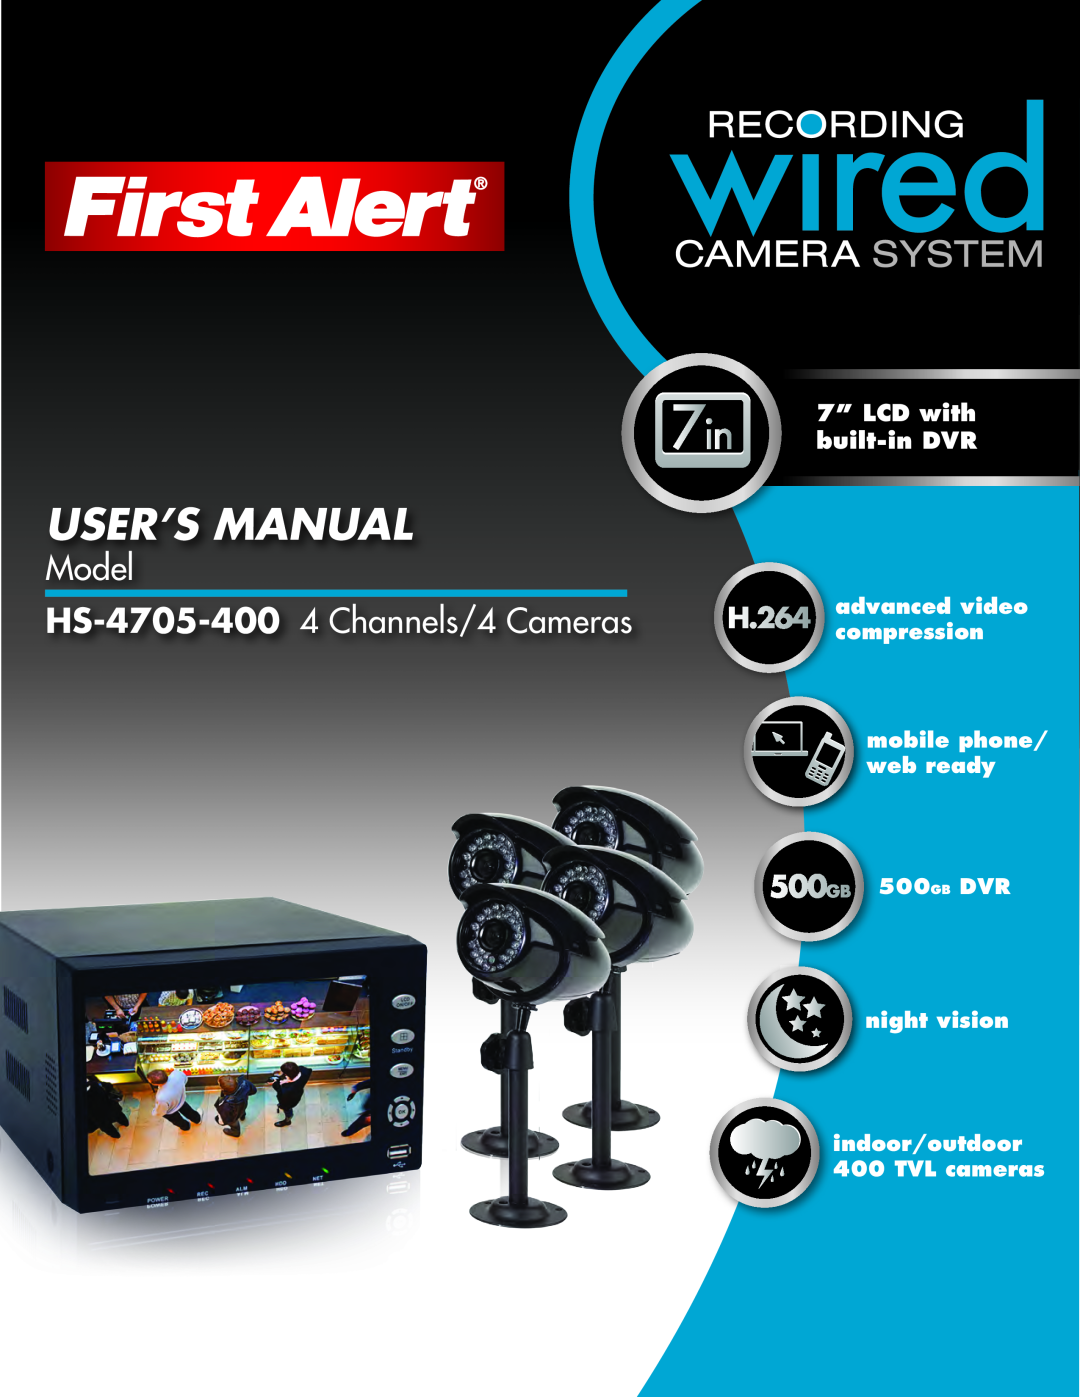 First Alert user manual Model HS-4705-400 4 Channels/4 Cameras, 7” LCD with built-inDVR 